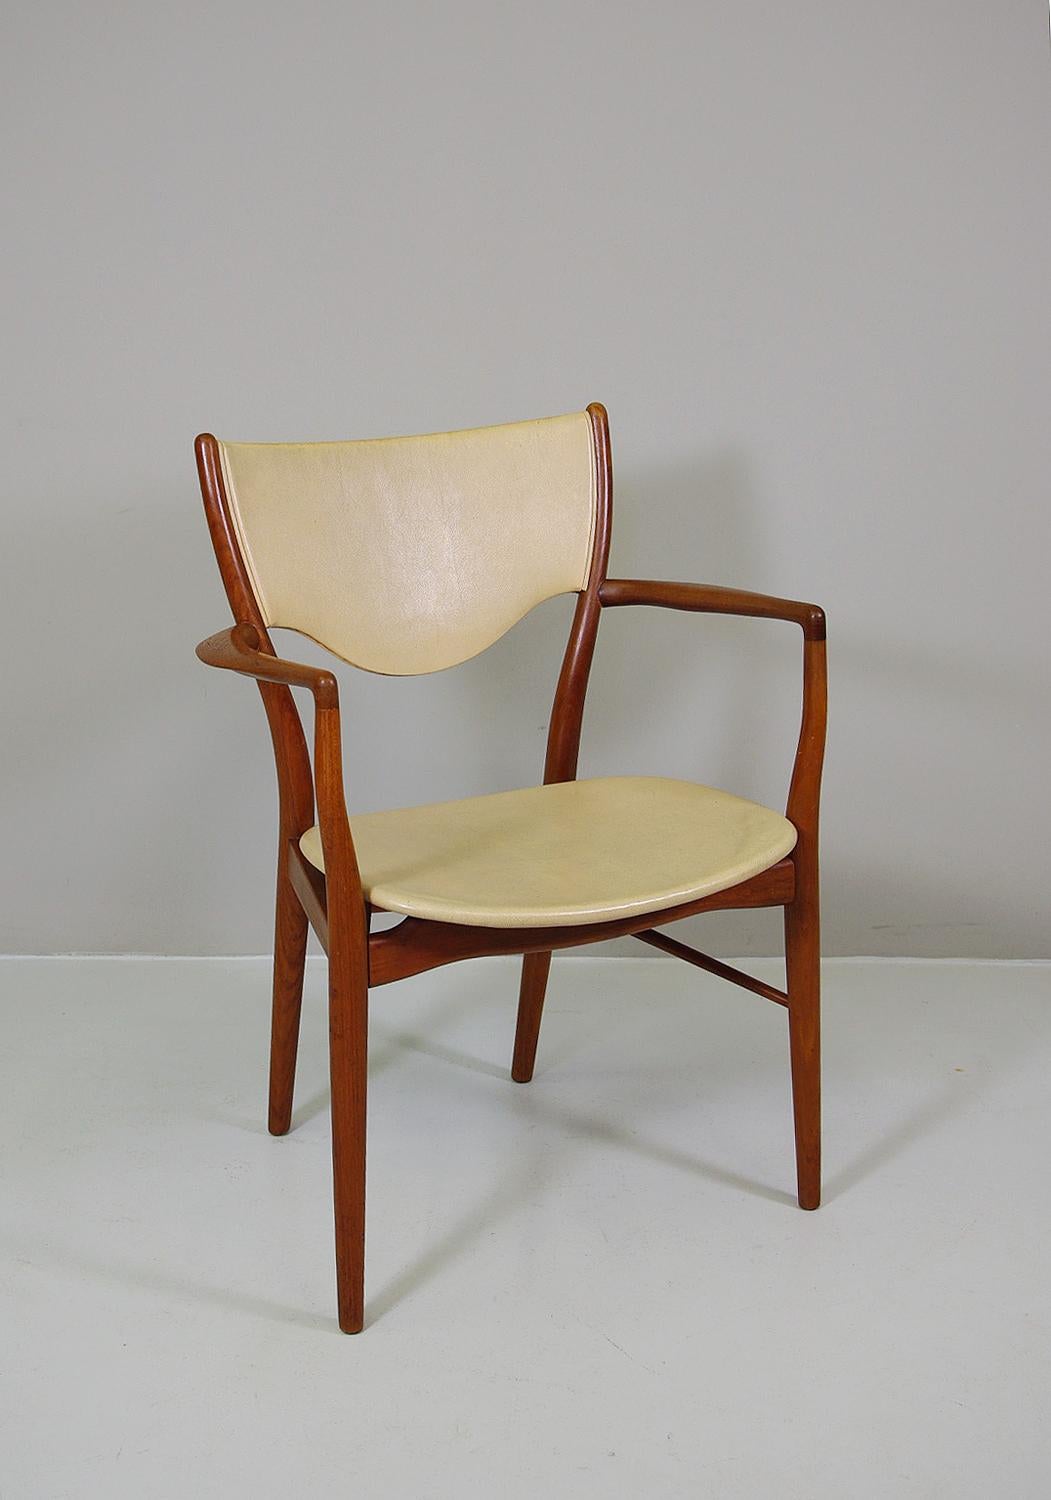 This iconic armchair made of solid mahogany wood and an extremely elegant and rare goatskin parchment cover. Fabricated in 1946 by Bovirke Denmark.
The BO46 is an example of Finn Juhl’s most beautiful work. It was originally designed in 1946 for